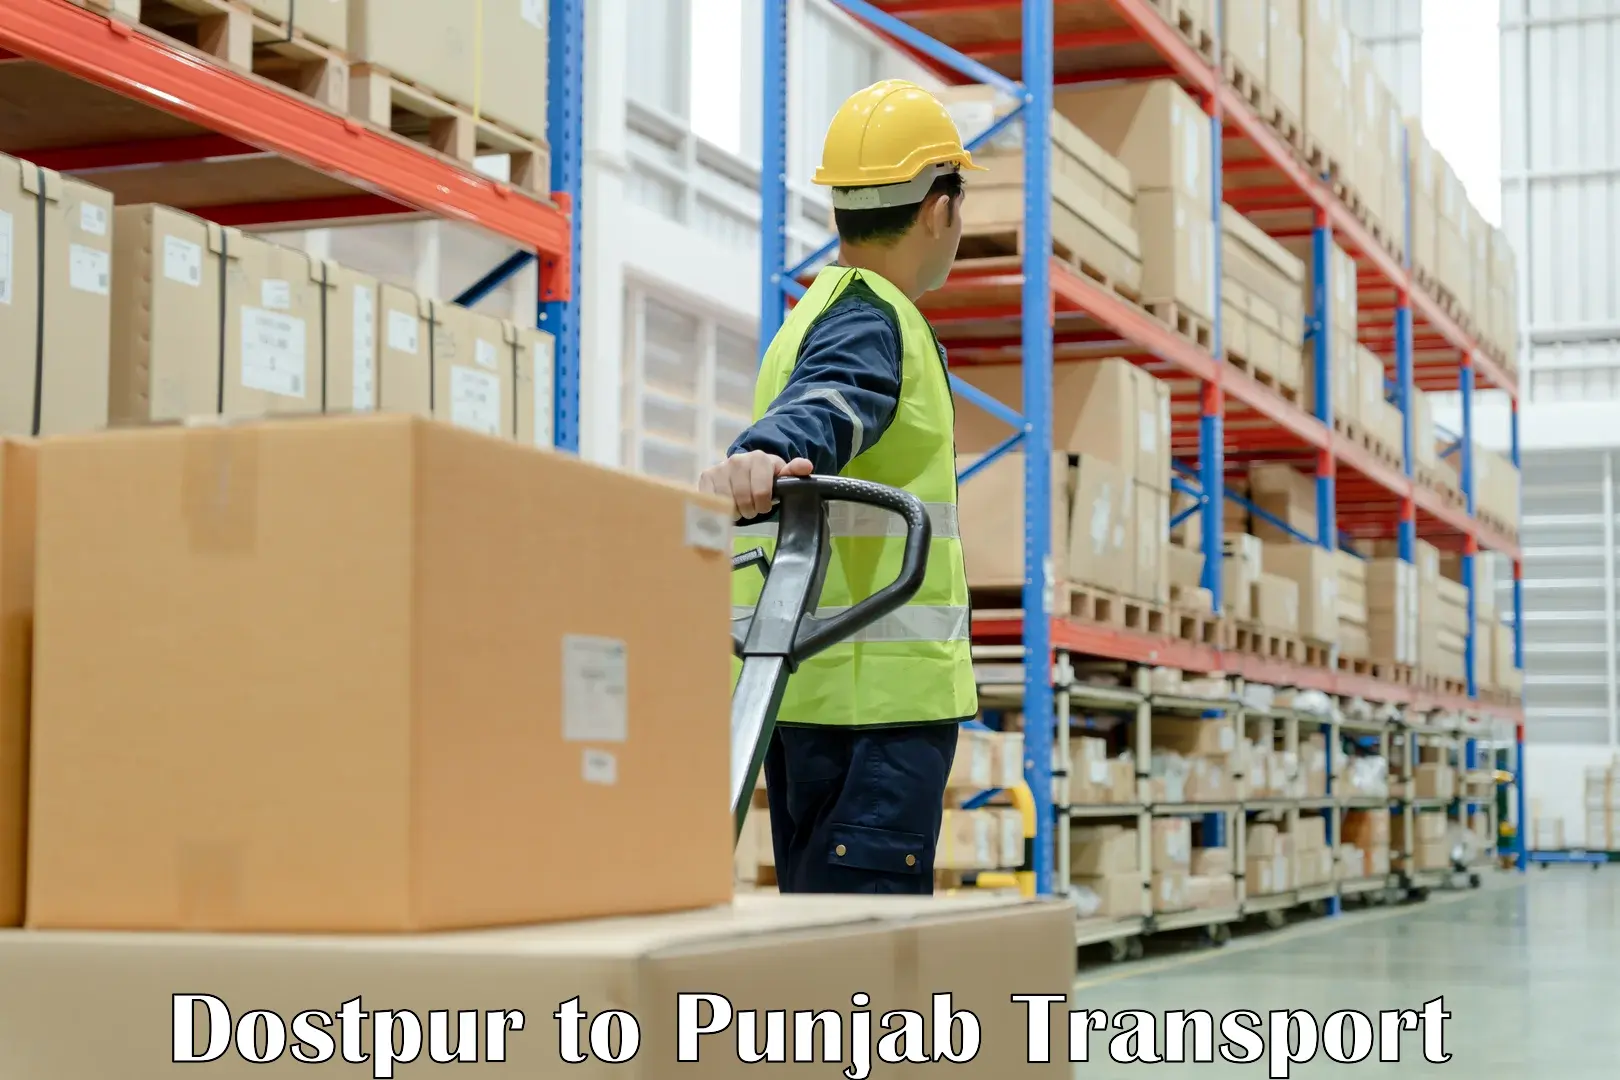 Daily parcel service transport Dostpur to Punjab Agricultural University Ludhiana